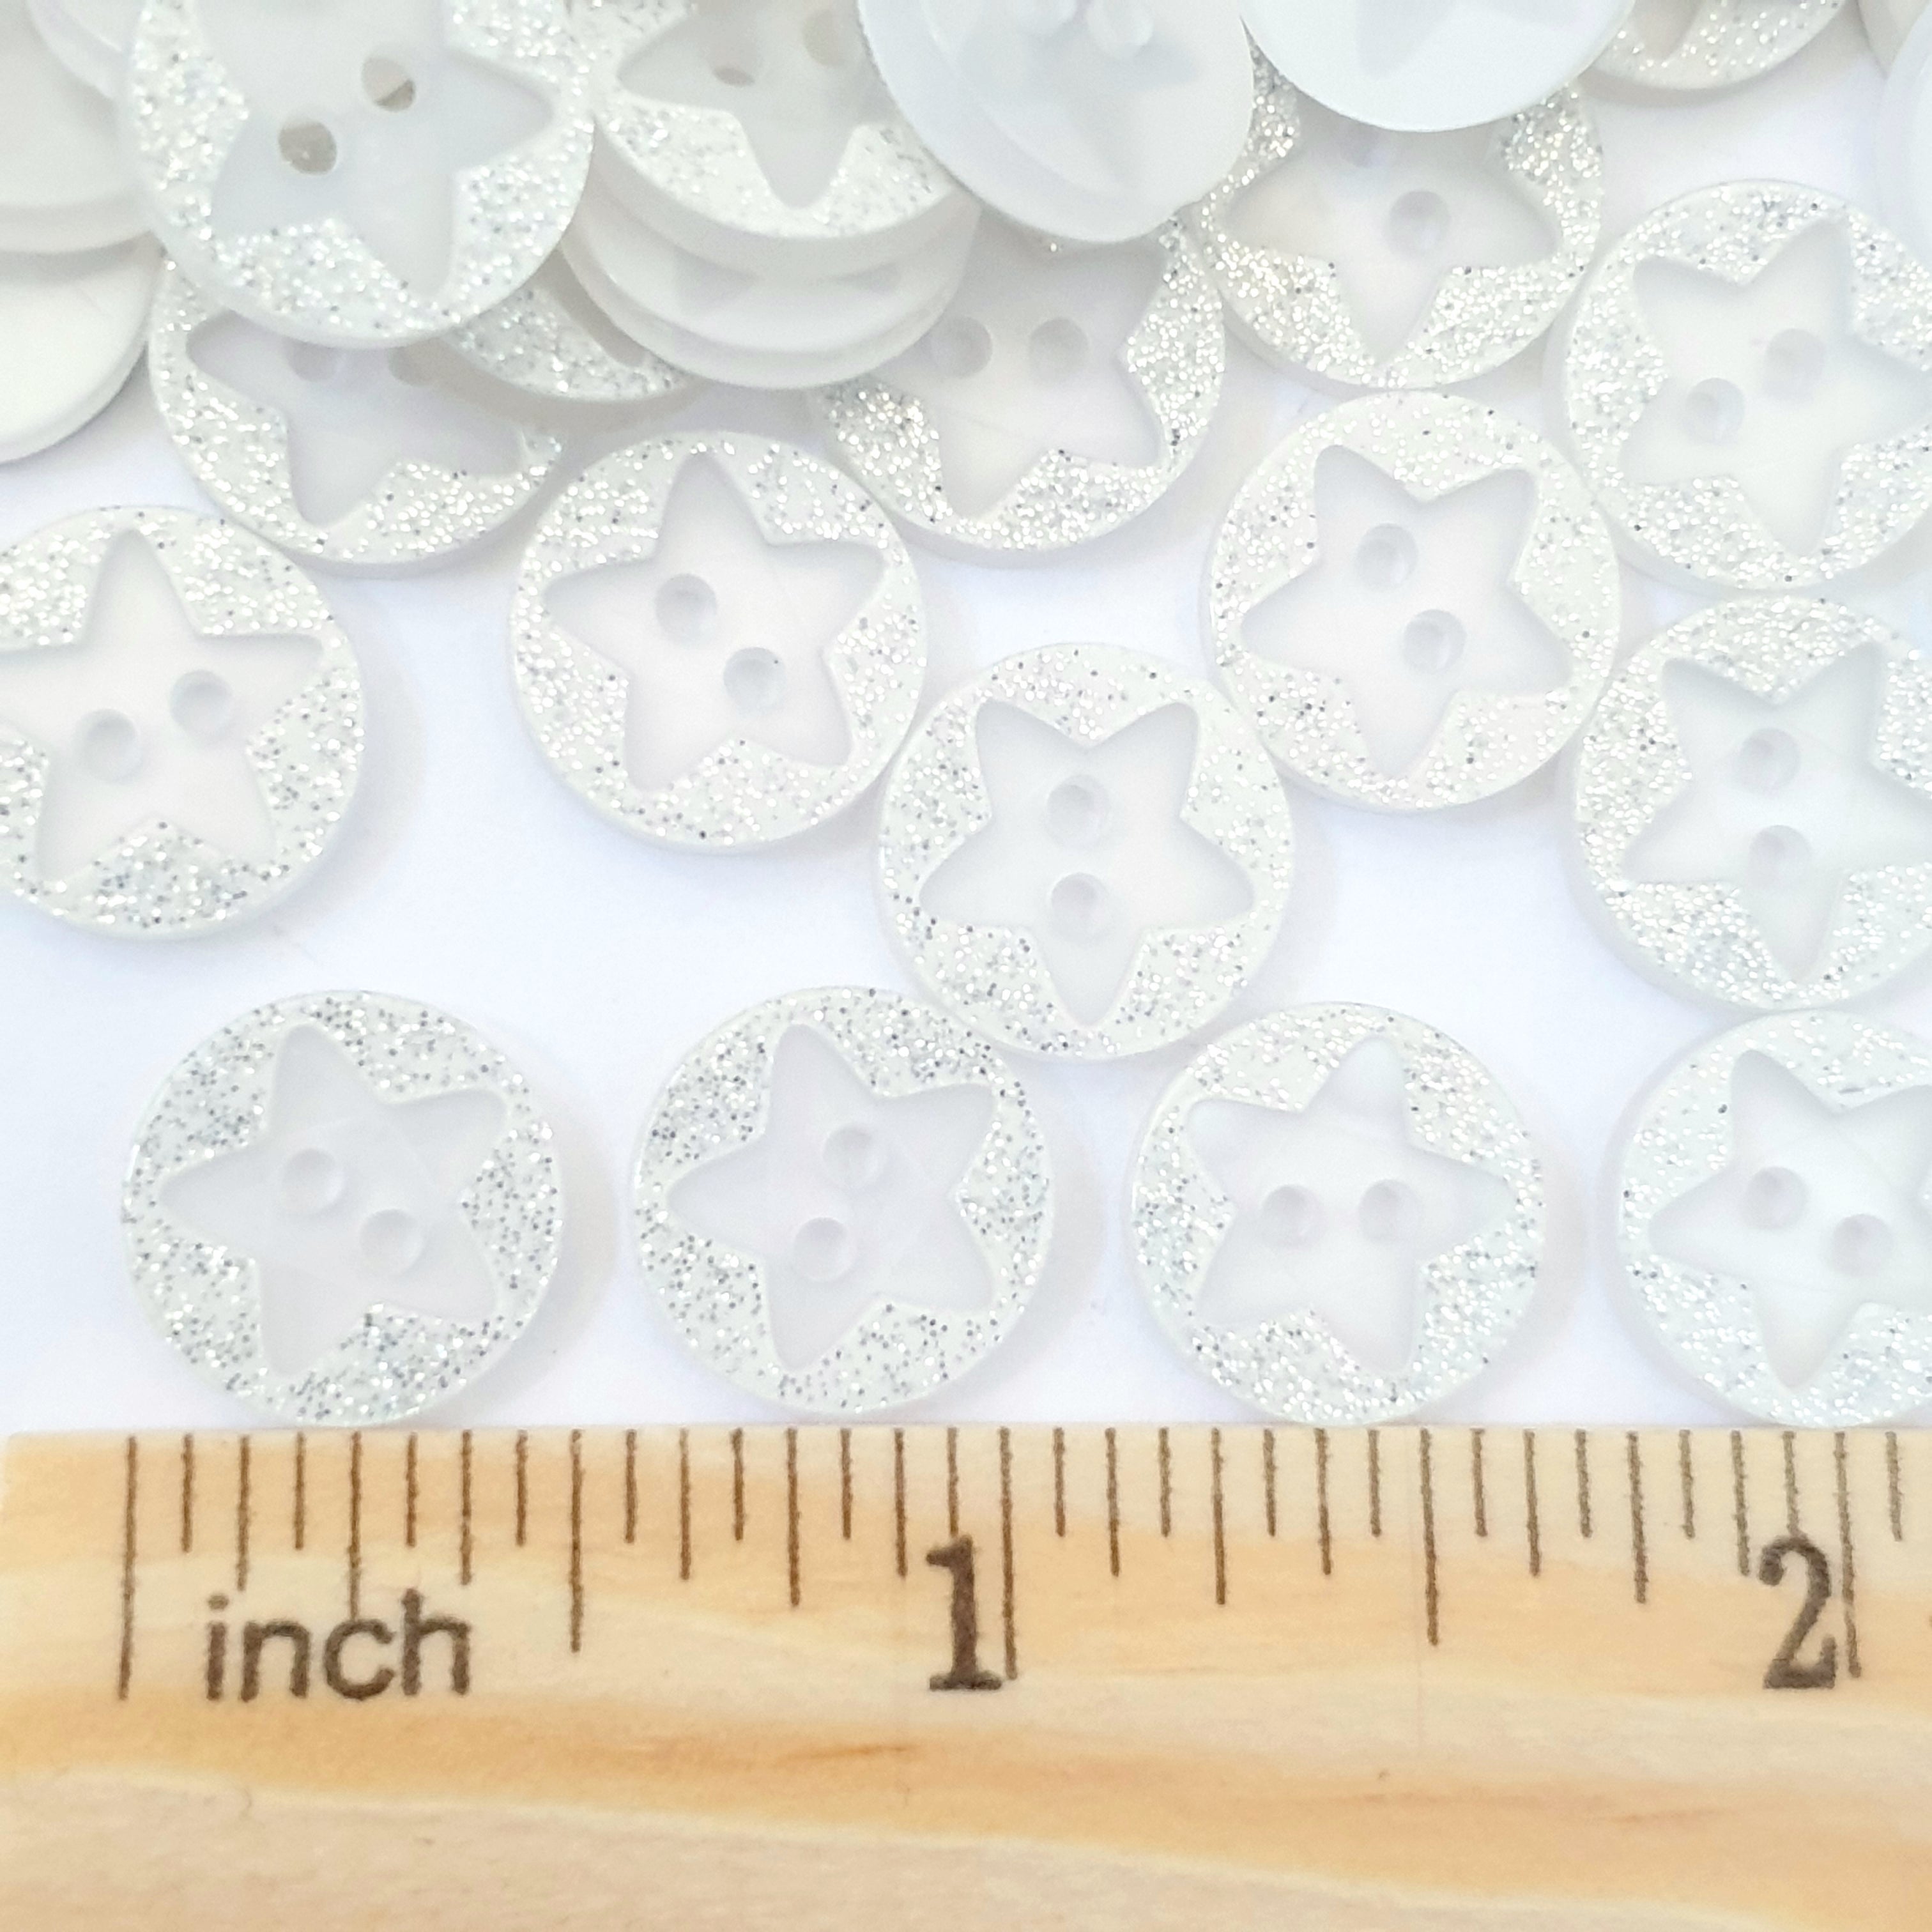 MajorCrafts 40pcs 12.5mm White Glittered 'Star Engraved' 2 Holes Round Sewing Resin Buttons